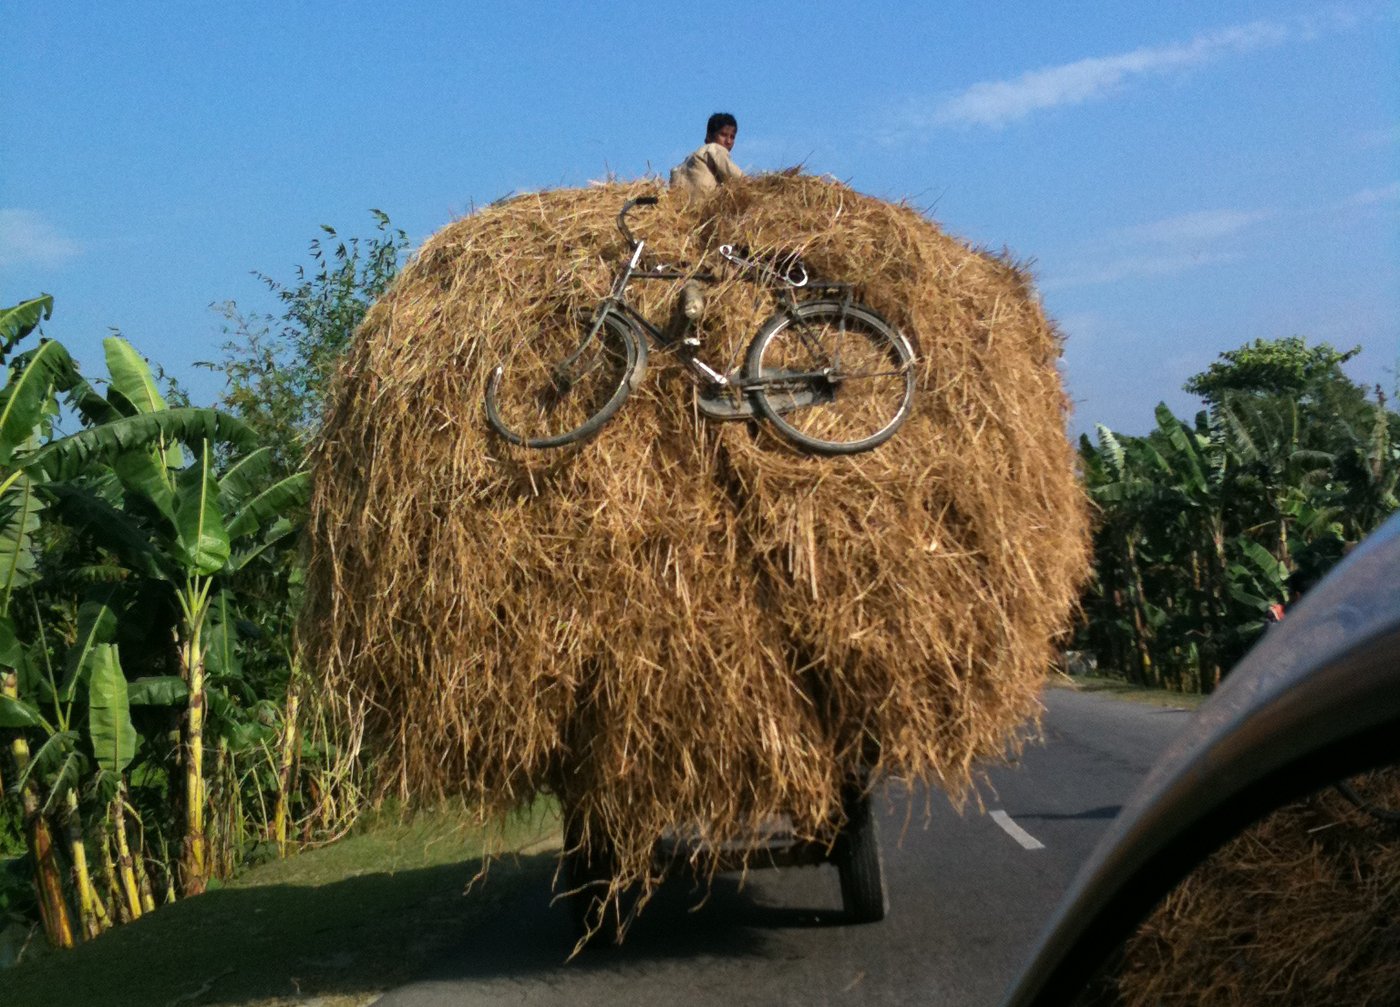 In journeys along rural Indian roads , you sometimes run into the delightfully bizarre